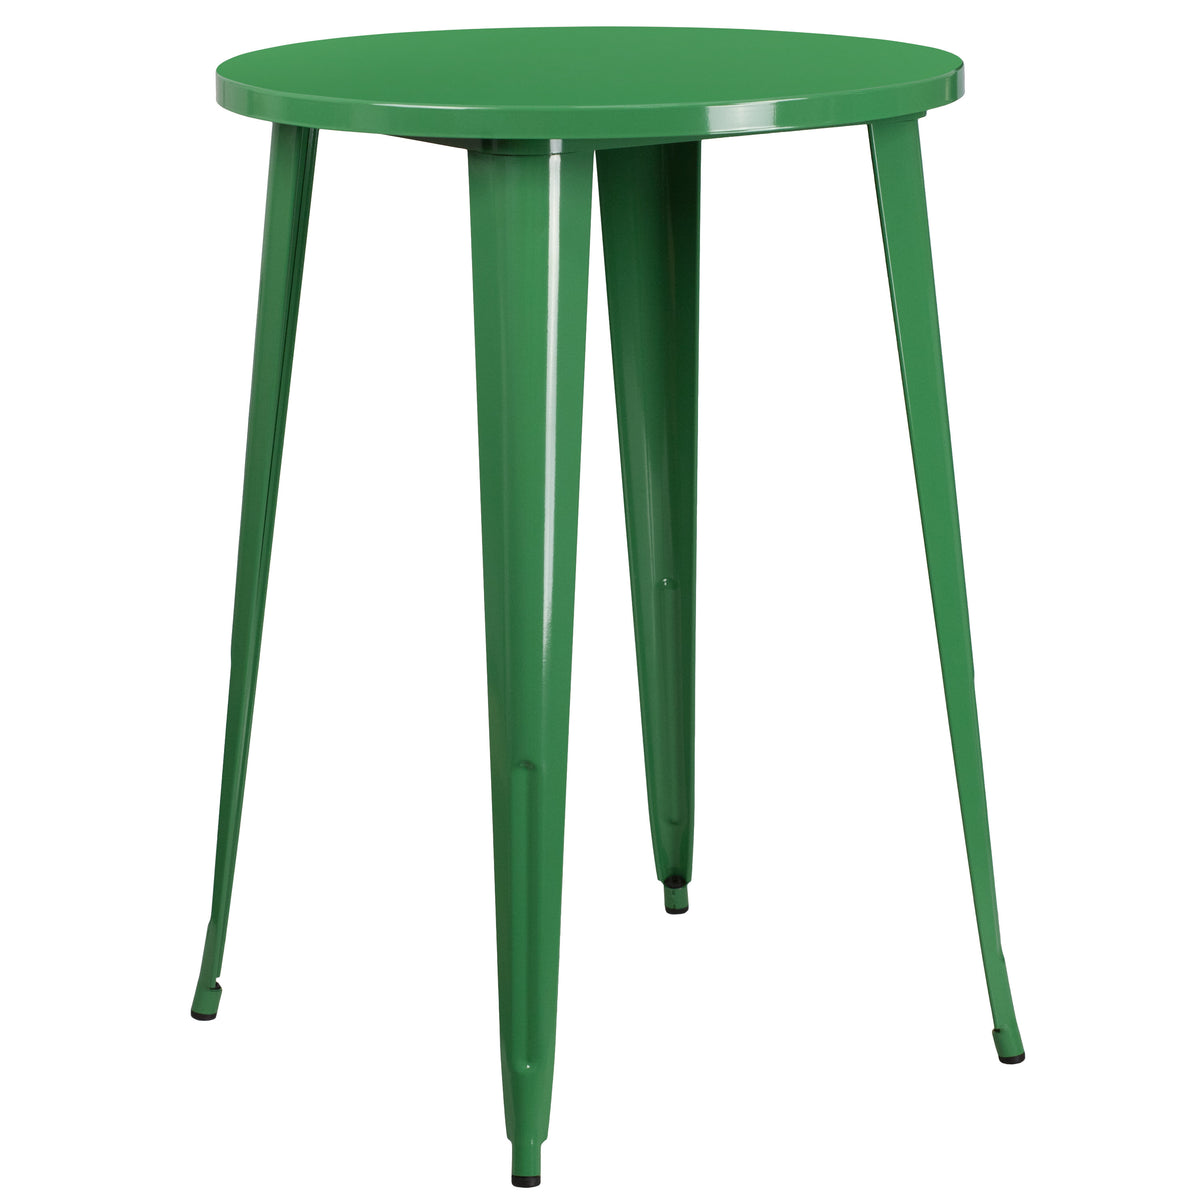 Green |#| 30inch Round Green Metal Indoor-Outdoor Bar Height Table - Industrial Table